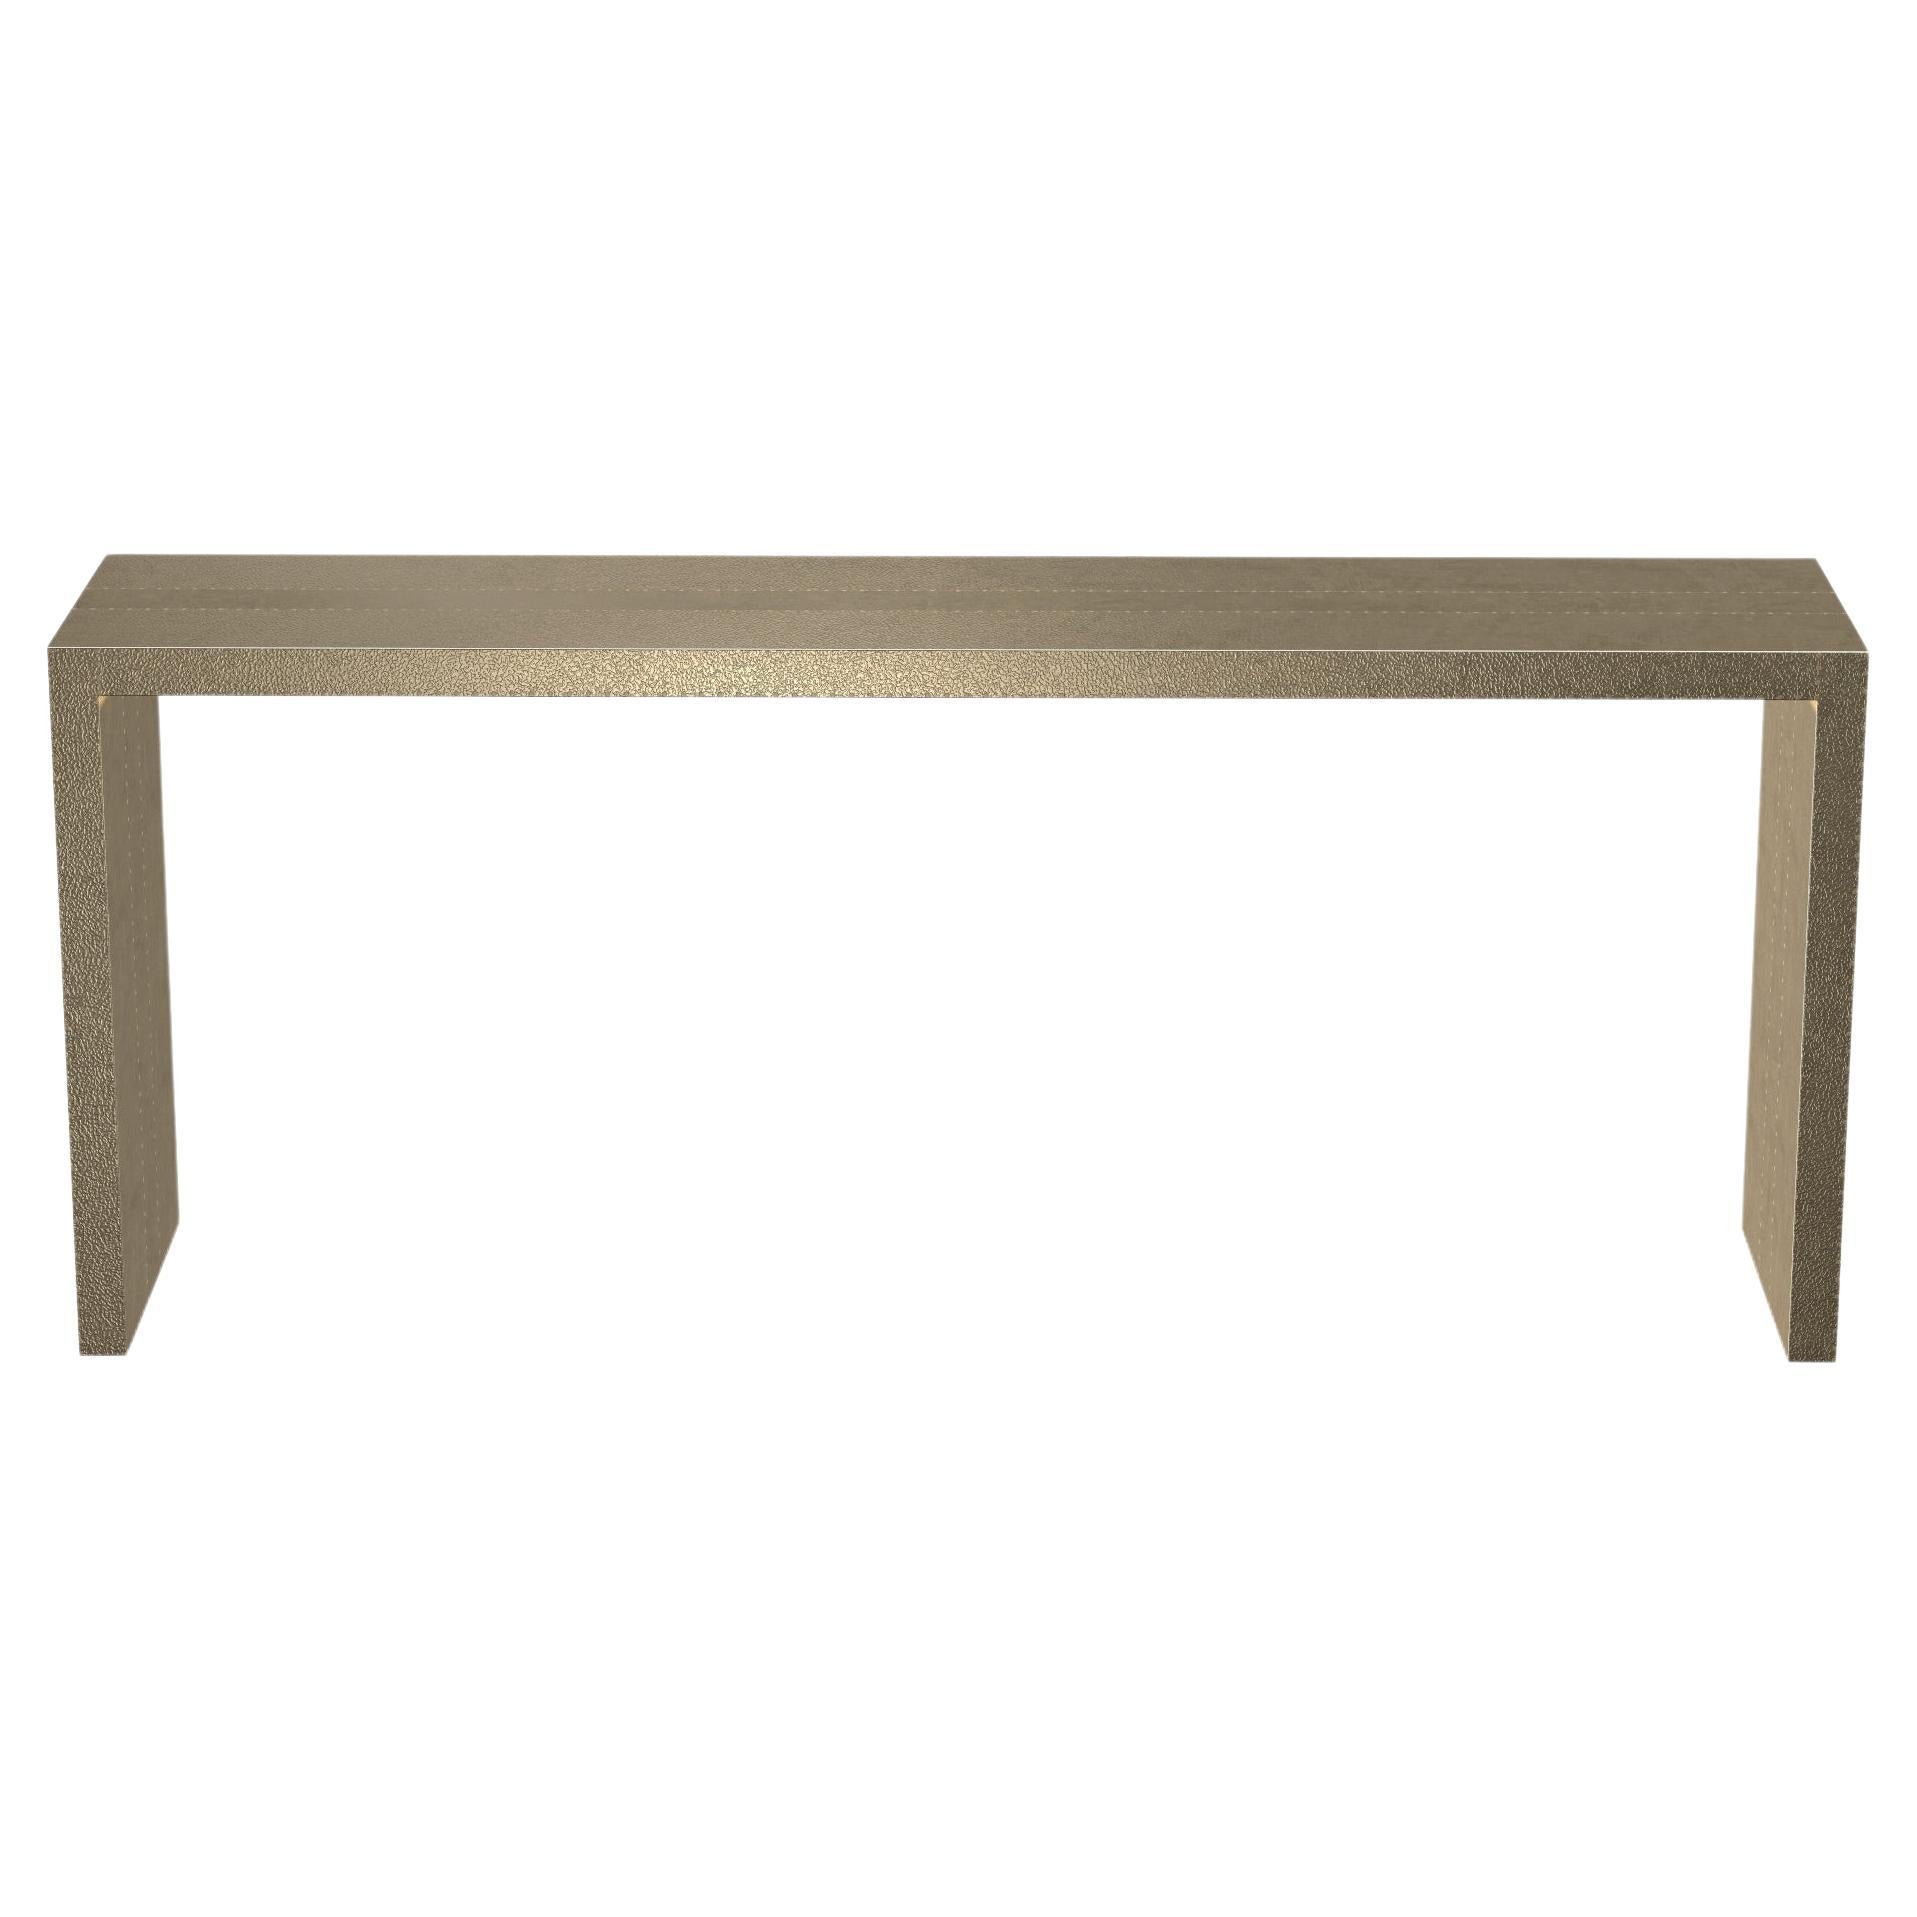 Art Nouveau Tray Console Tables in Fine Hammered Brass by Alison Spear